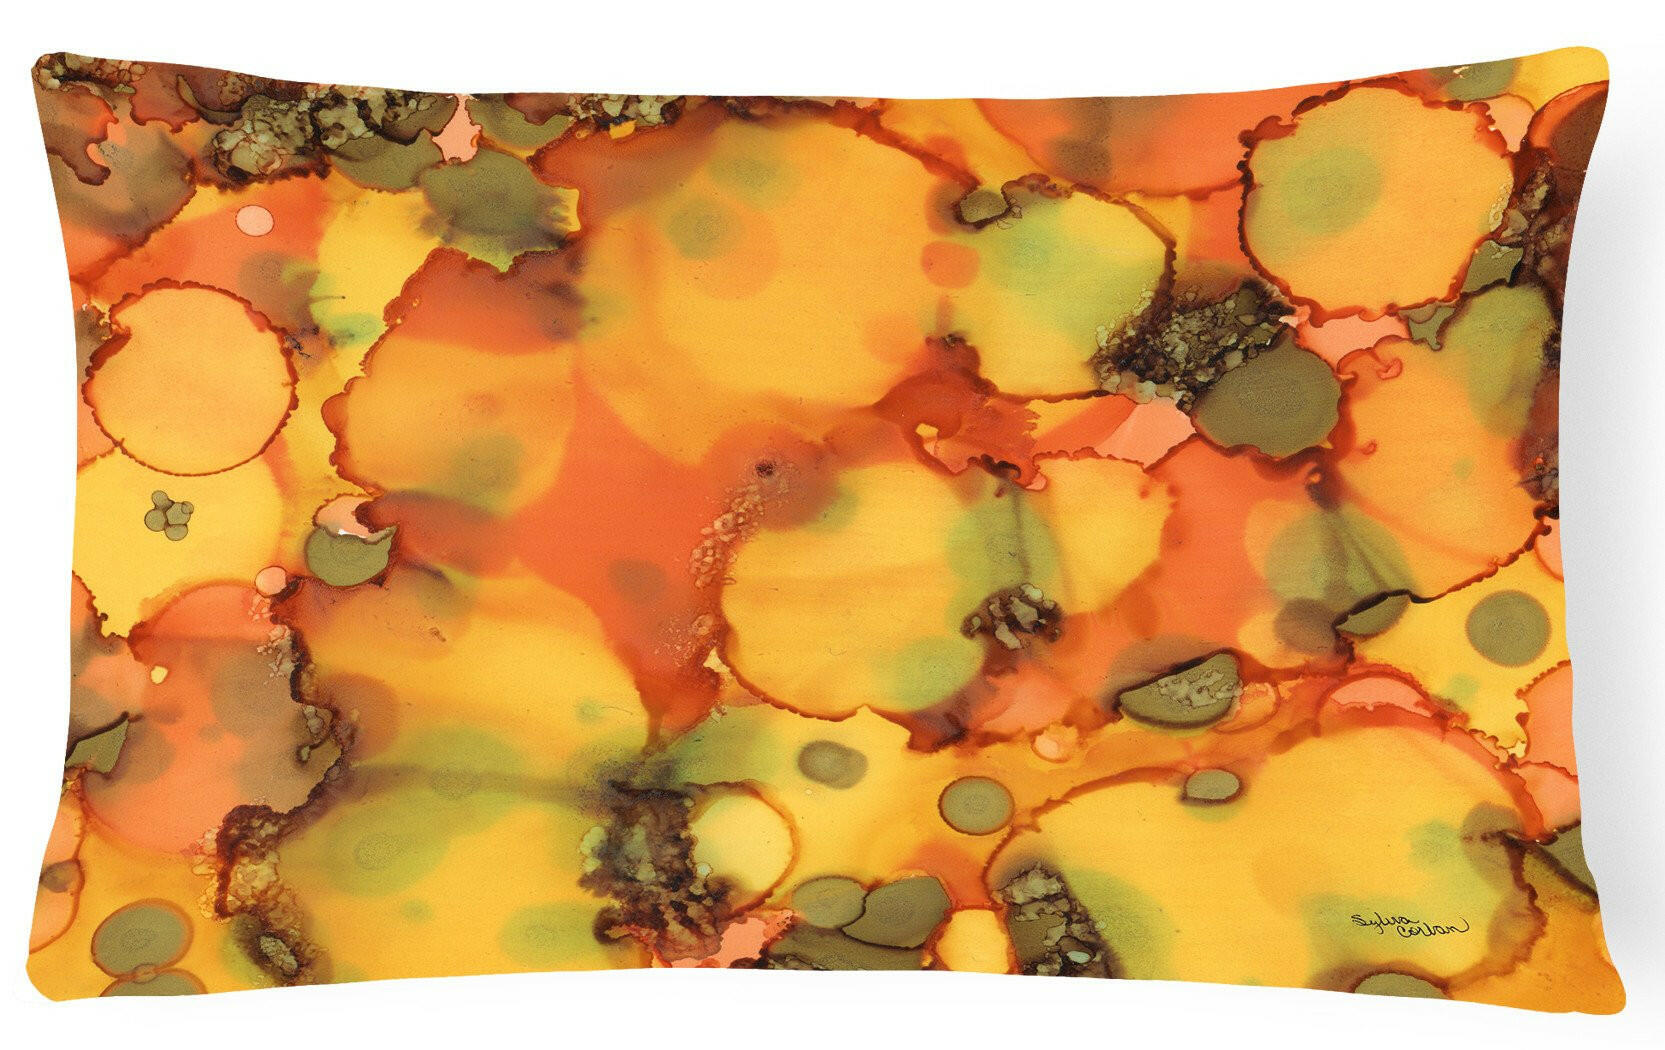 Abstract in Orange and Greens Fabric Decorative Pillow 8976PW1216 by Caroline's Treasures